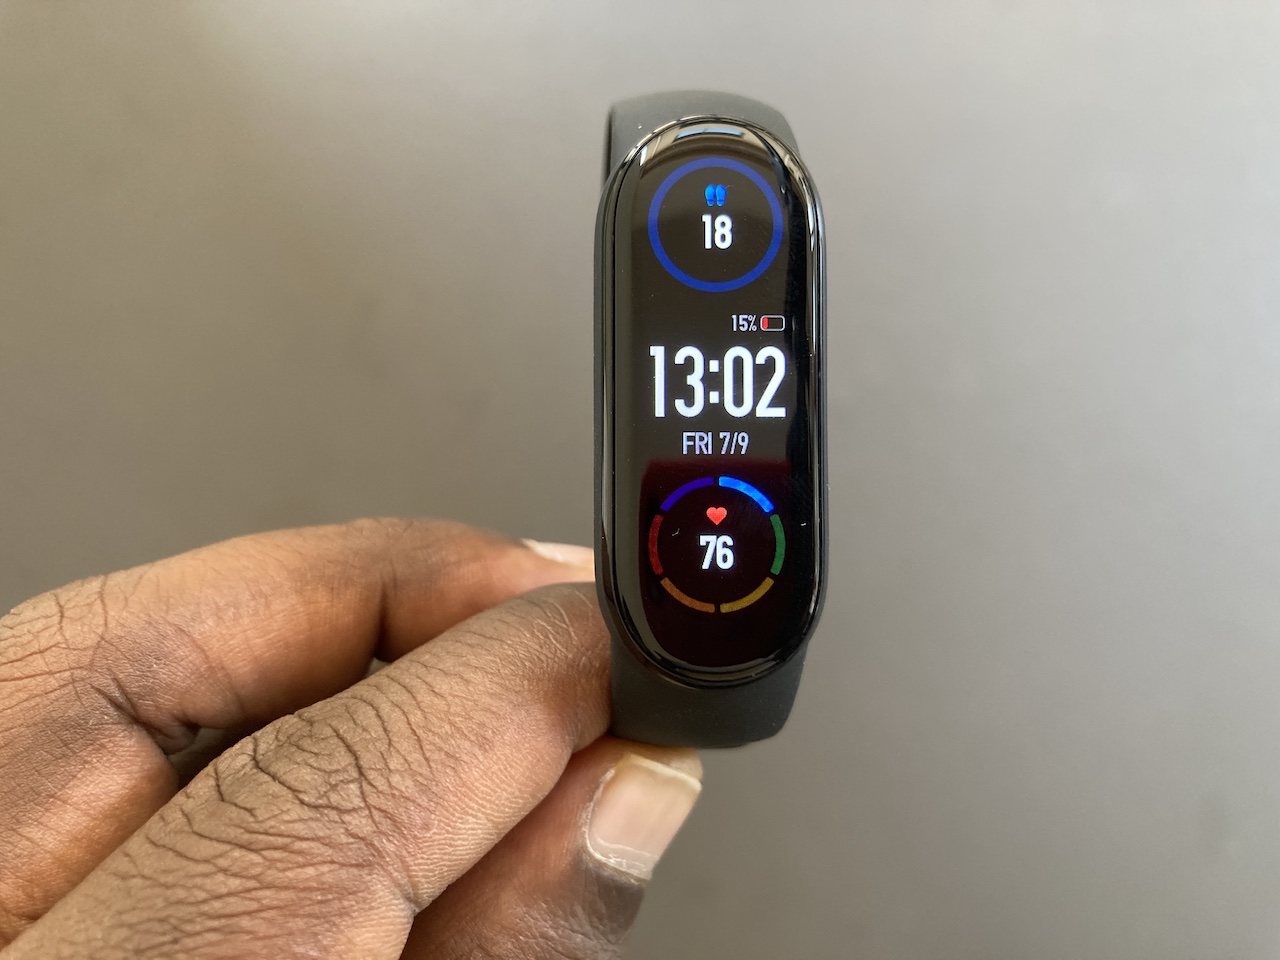 Xiaomi Mi Band 6 gets sleep breathing quality monitoring feature